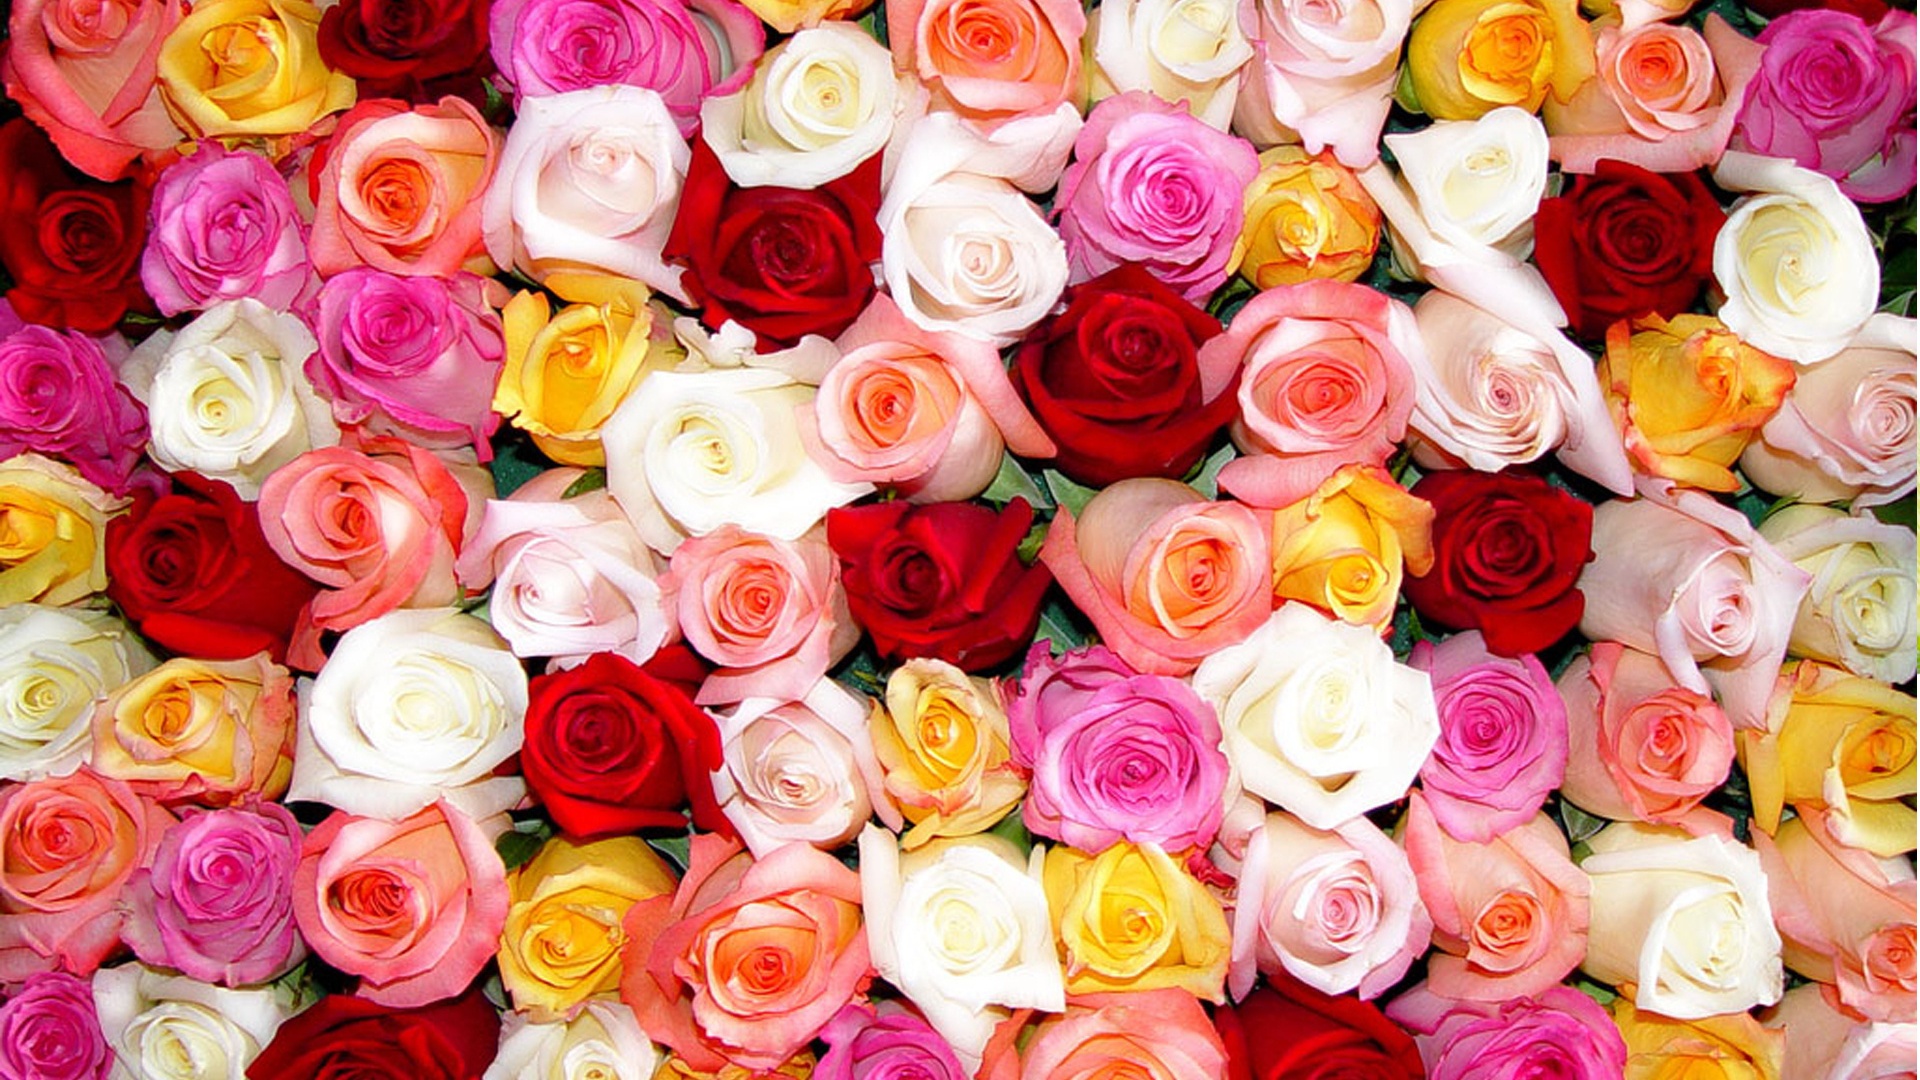 Multi-Colored Roses - Wallpaper, High Definition, High Quality, Widescreen